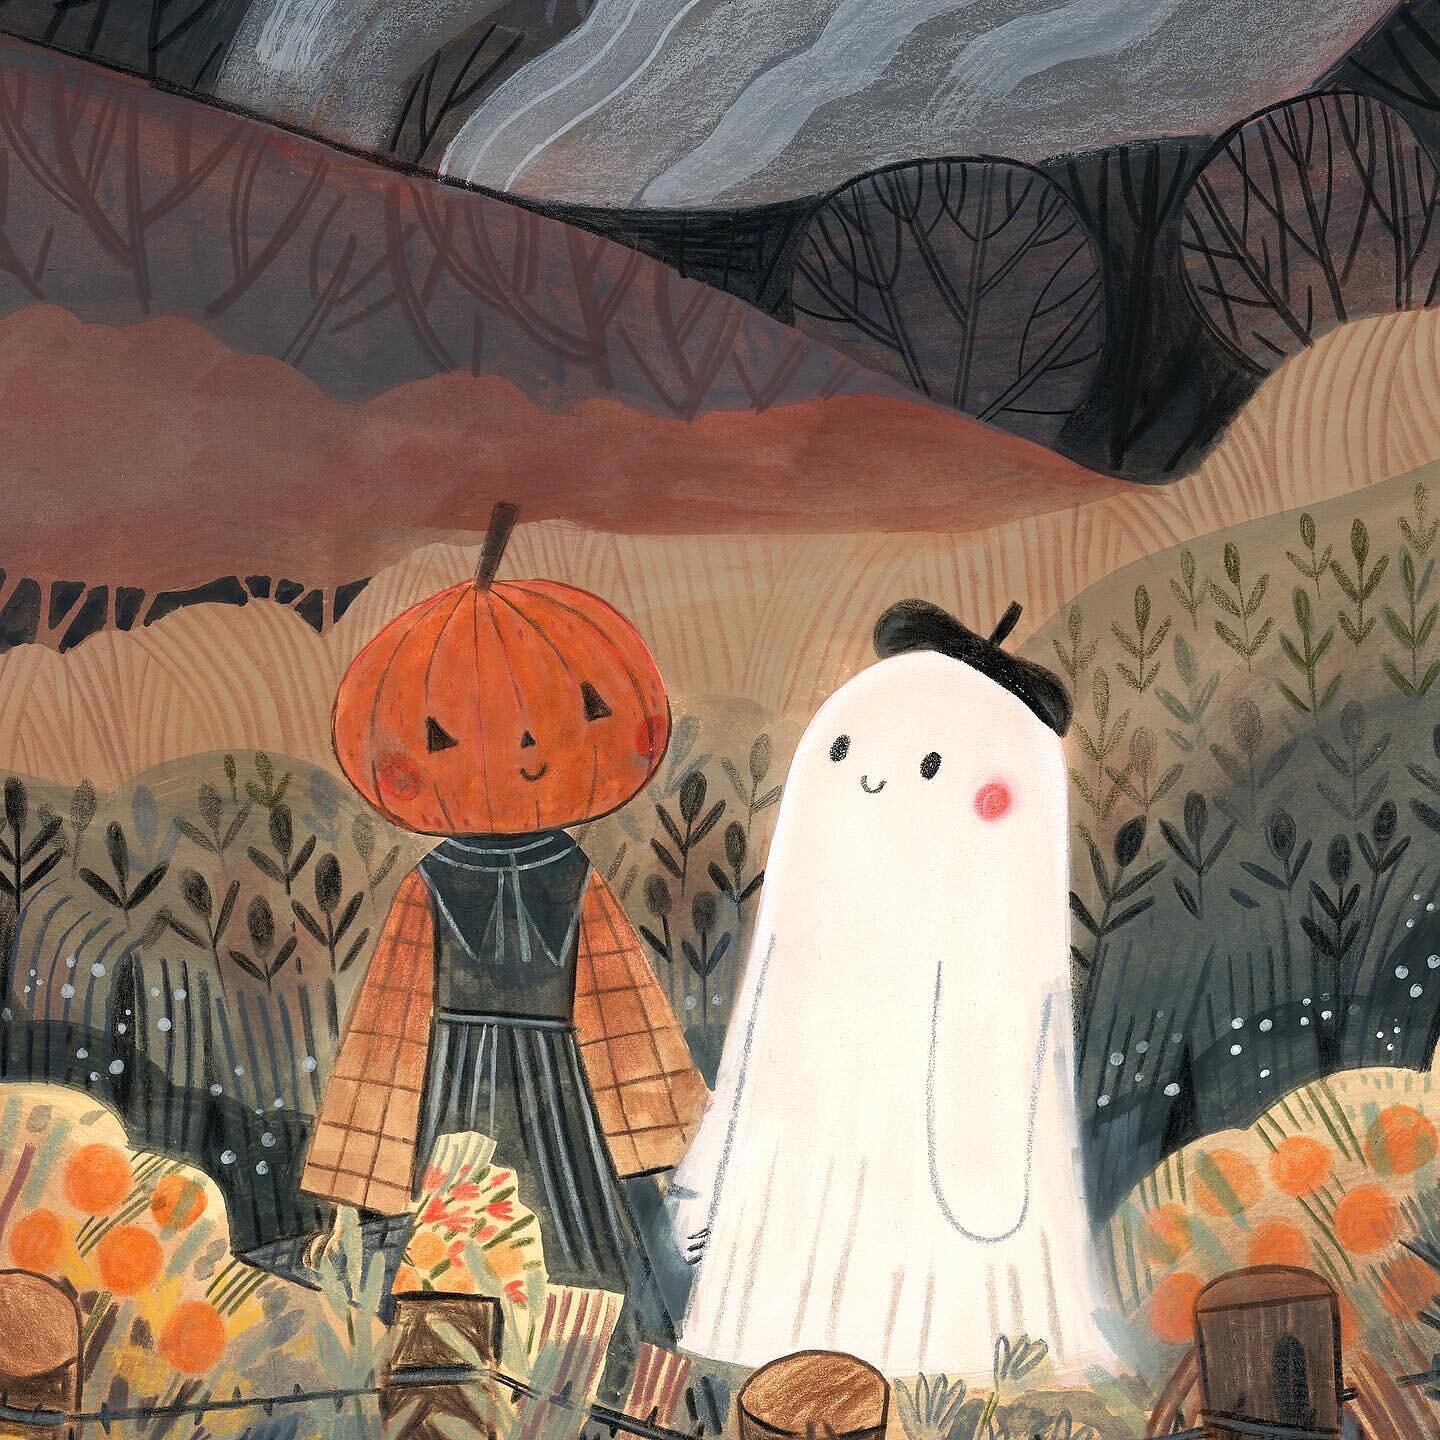 The absolute best buds around, check out this beautiful landscape with the cutest duo ever. 
⠀⠀⠀⠀⠀⠀⠀⠀⠀
Are you ready for spooky season to hit? Have you already pulled out your decorations?
.
.
This print is available on my Etsy! Link in bio.
.
#illus